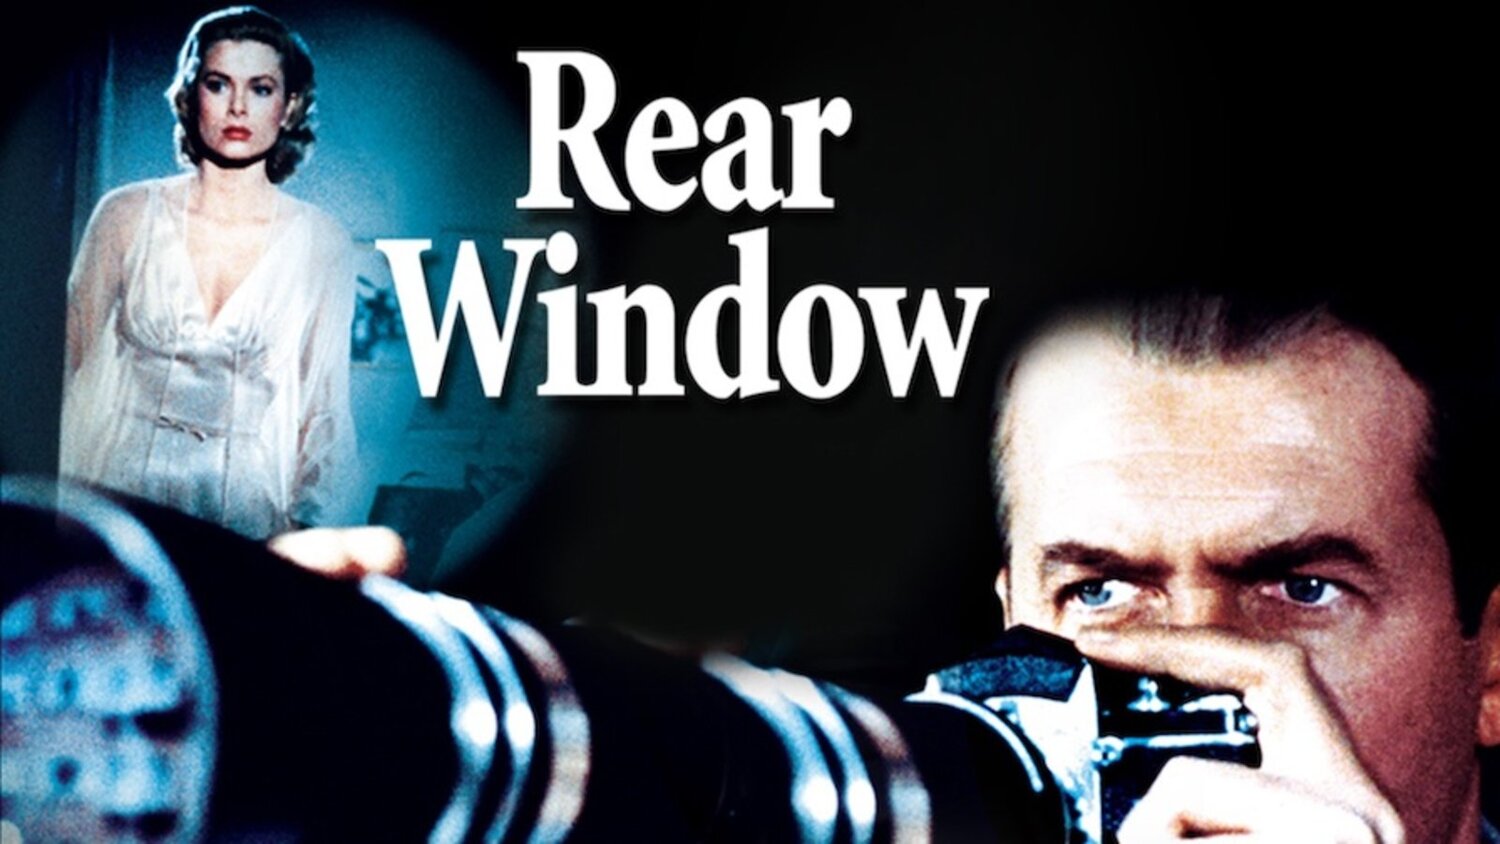 43-facts-about-the-movie-rear-window